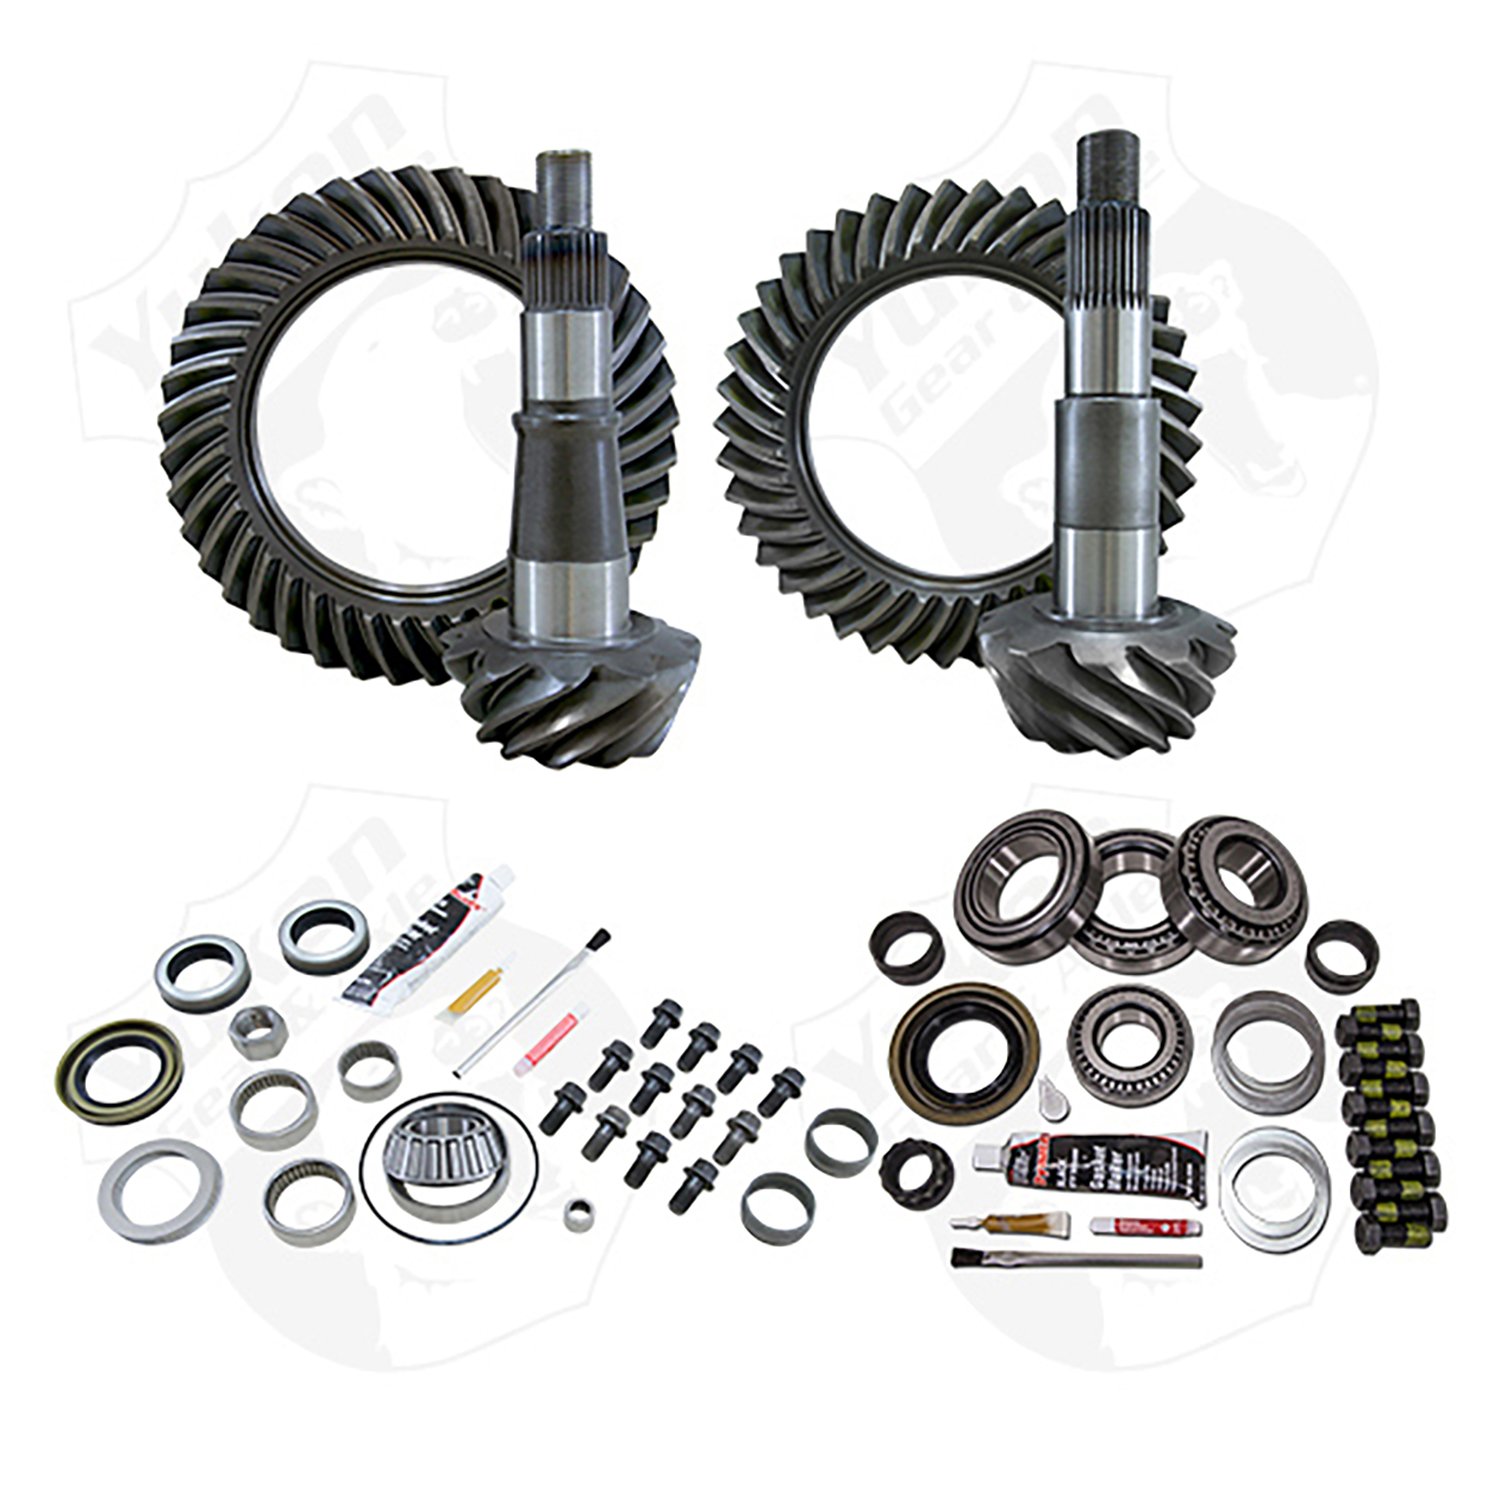 Gear & Install Kit Package For 2011-2013 Ram 2500 And 3500, 4.11 Ratio